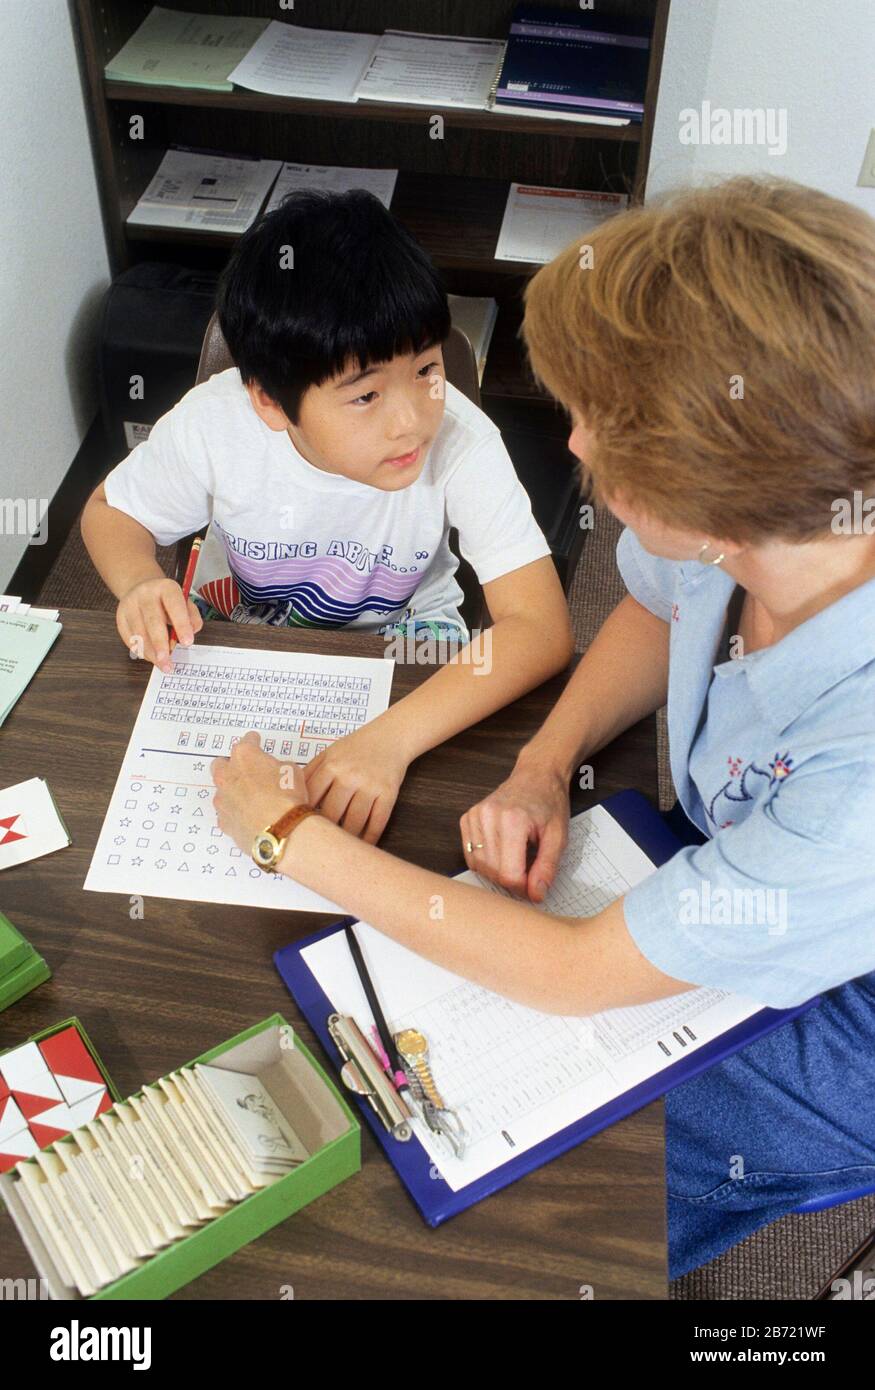 Austin Texas USA,1992: School psychologist administers WISC psychological test to second-grade student.  MR EH-0040-0042   ©Bob Daemmrich Stock Photo